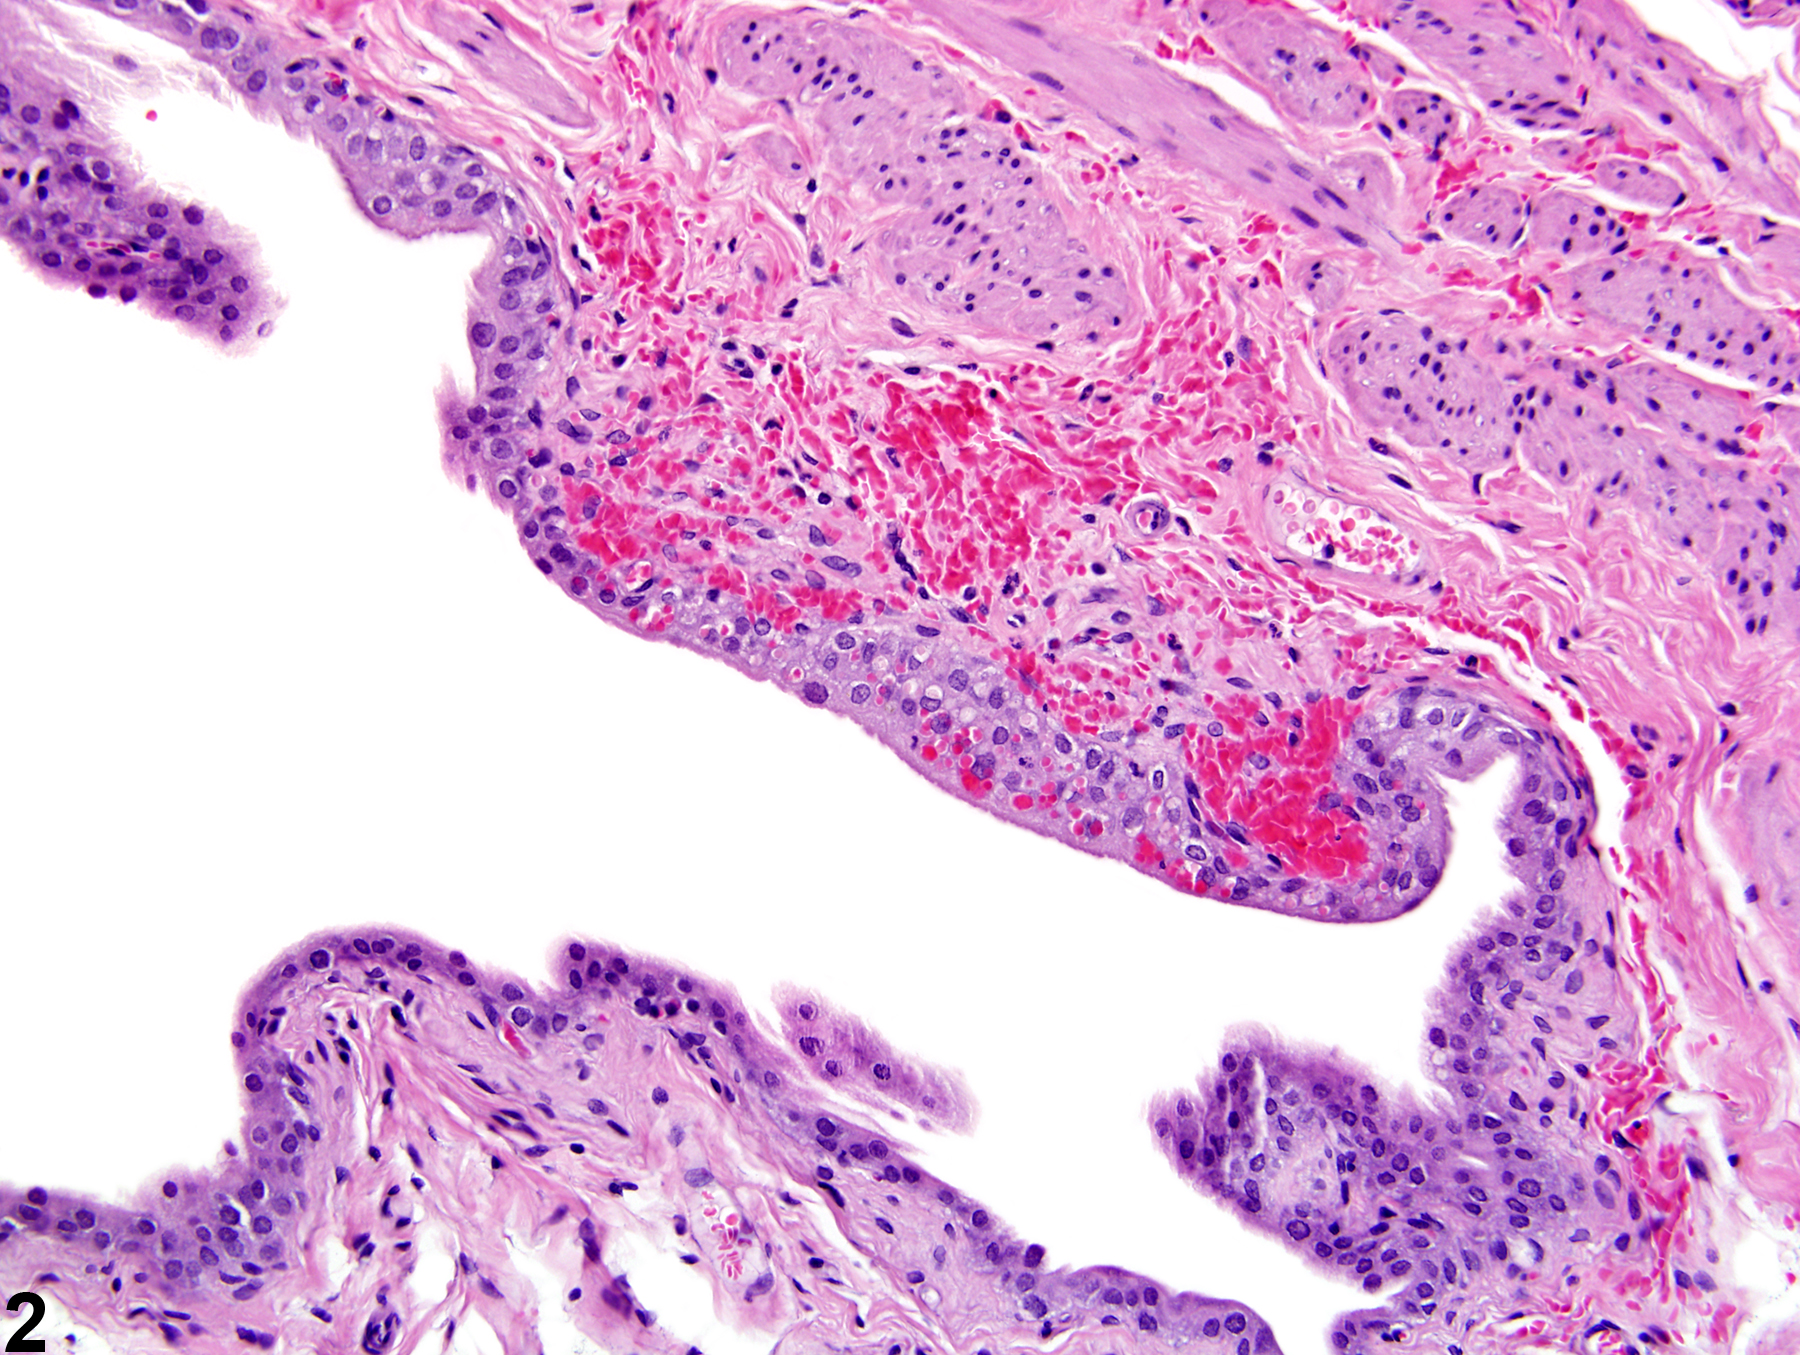 Image of hemorrhage in the urinary bladder from a male F344/N rat in a chronic study